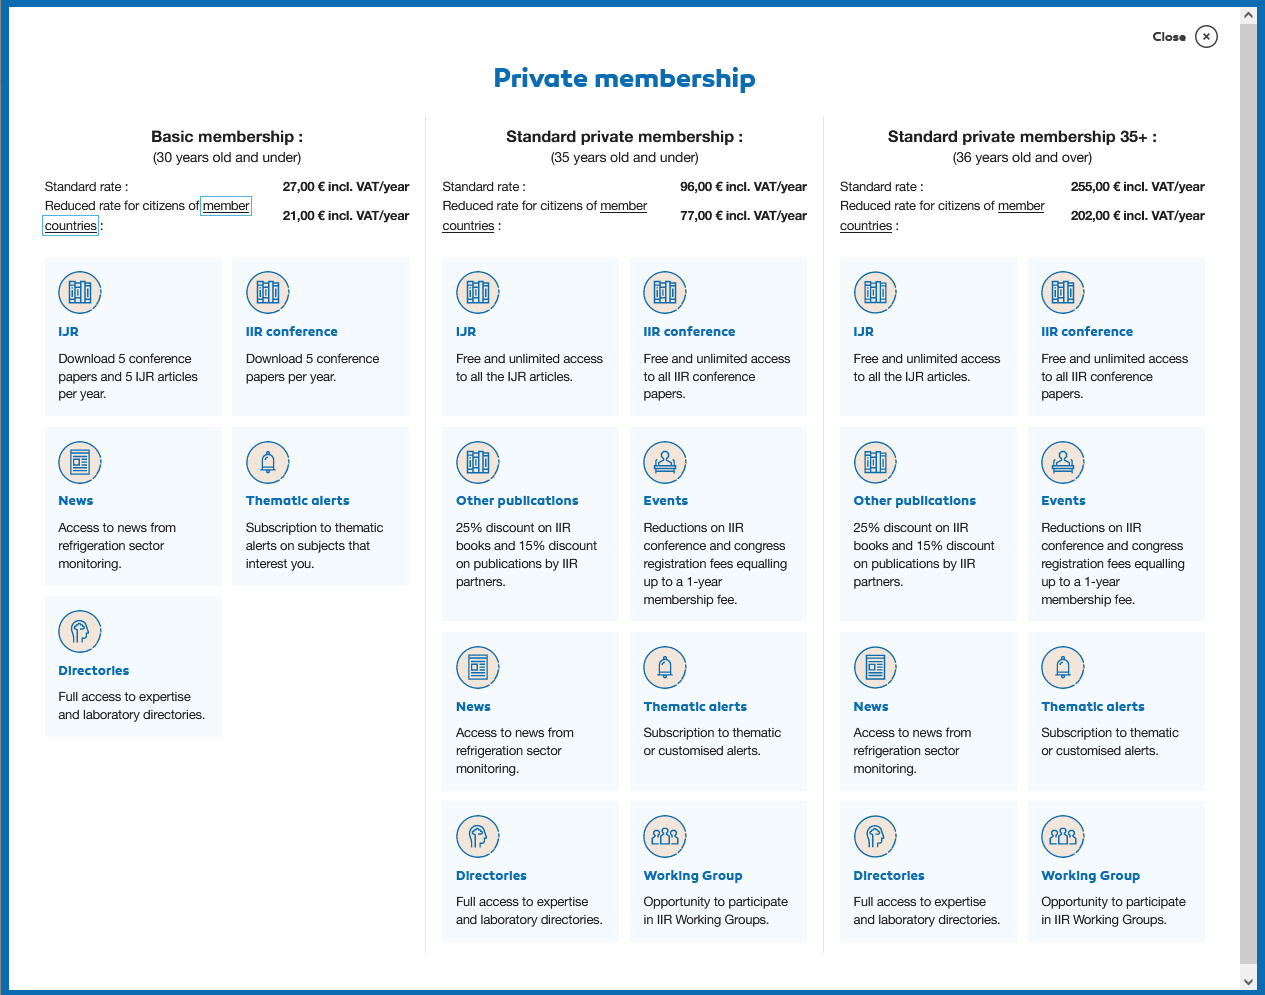 IIR services for private members according to the membership rate